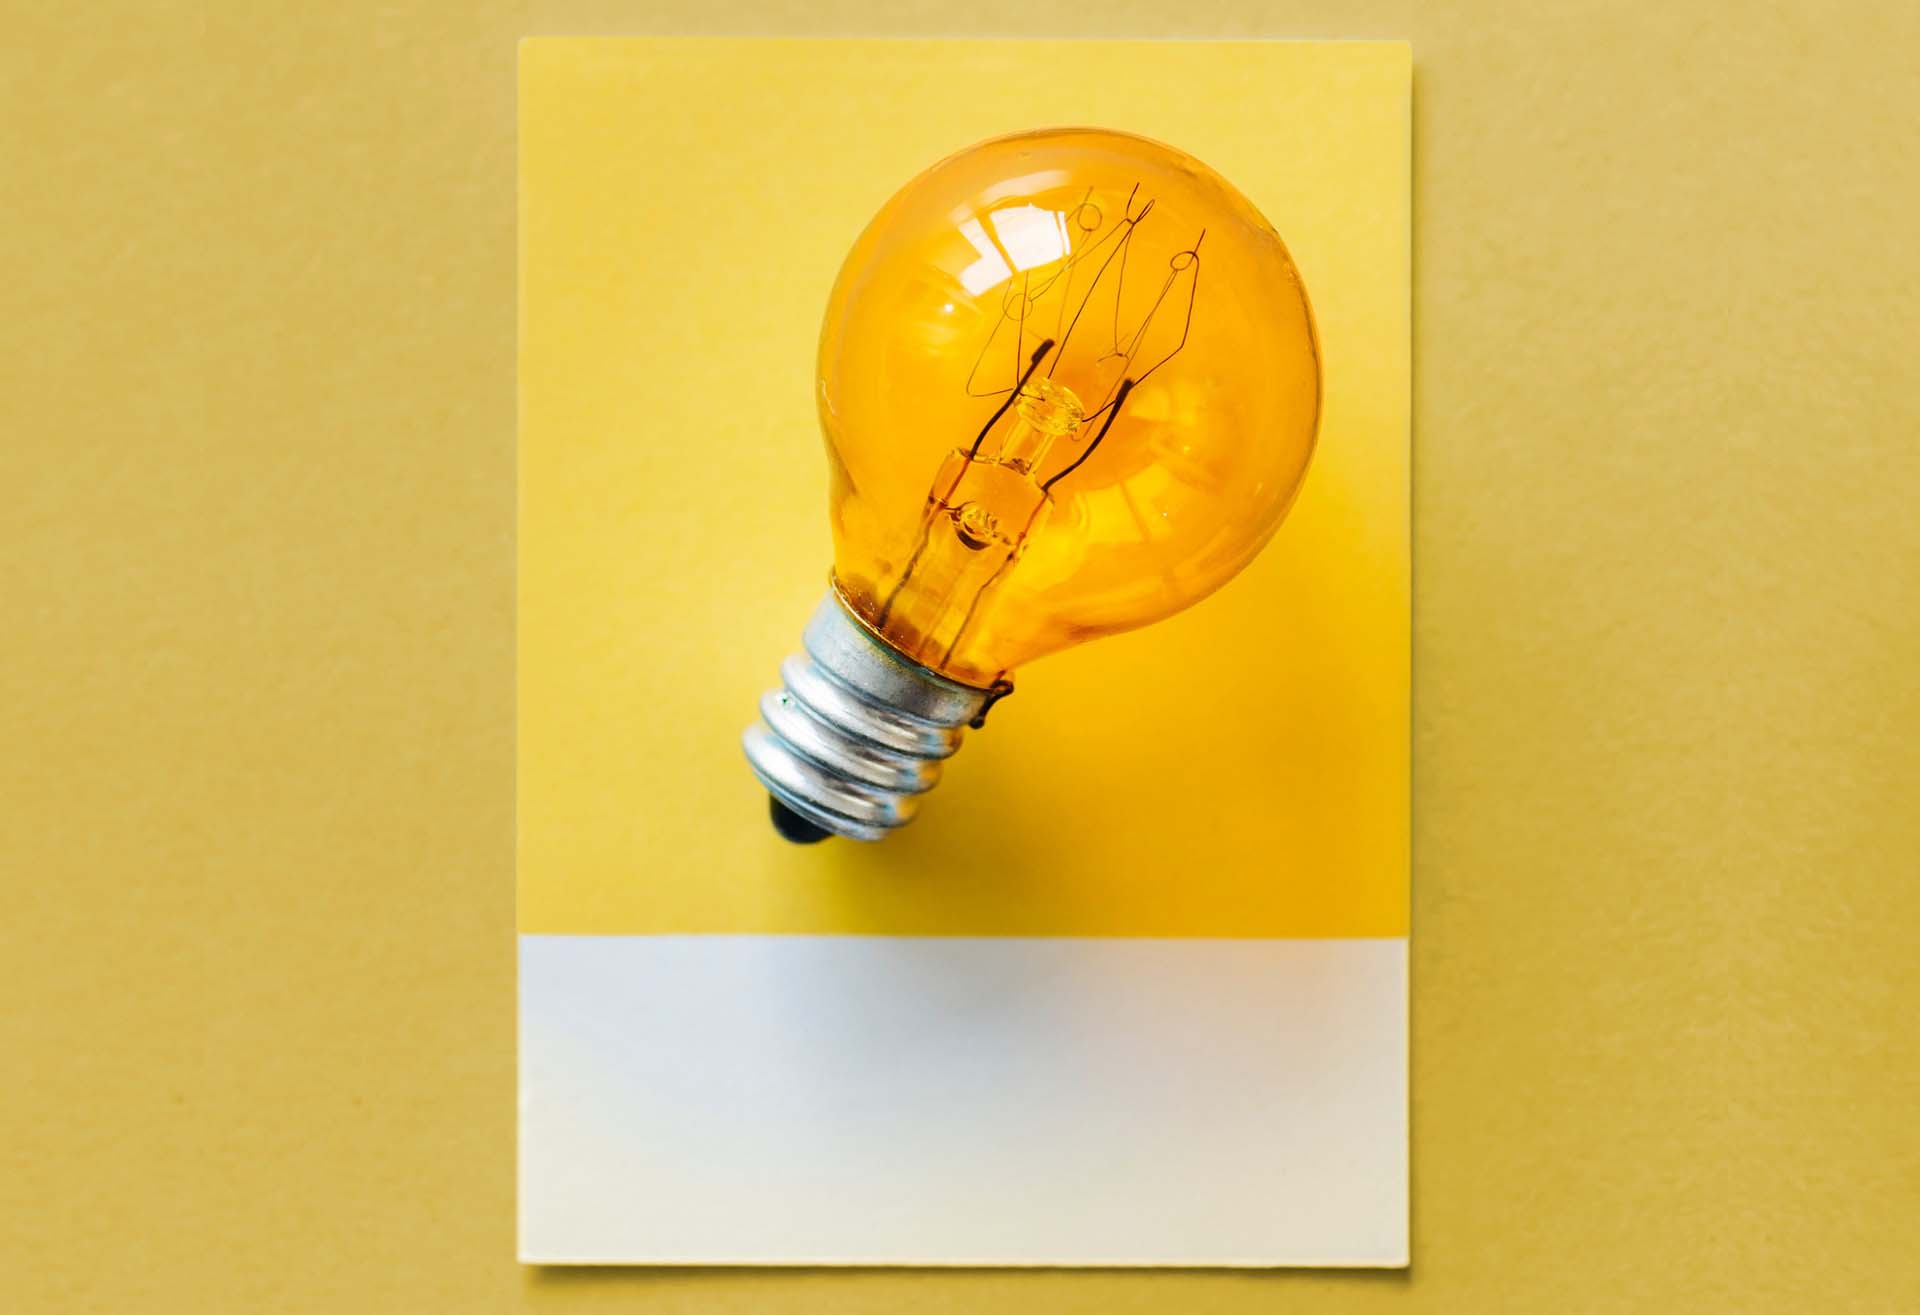 Orange light bulb on a yellow background representing thinking and innovation